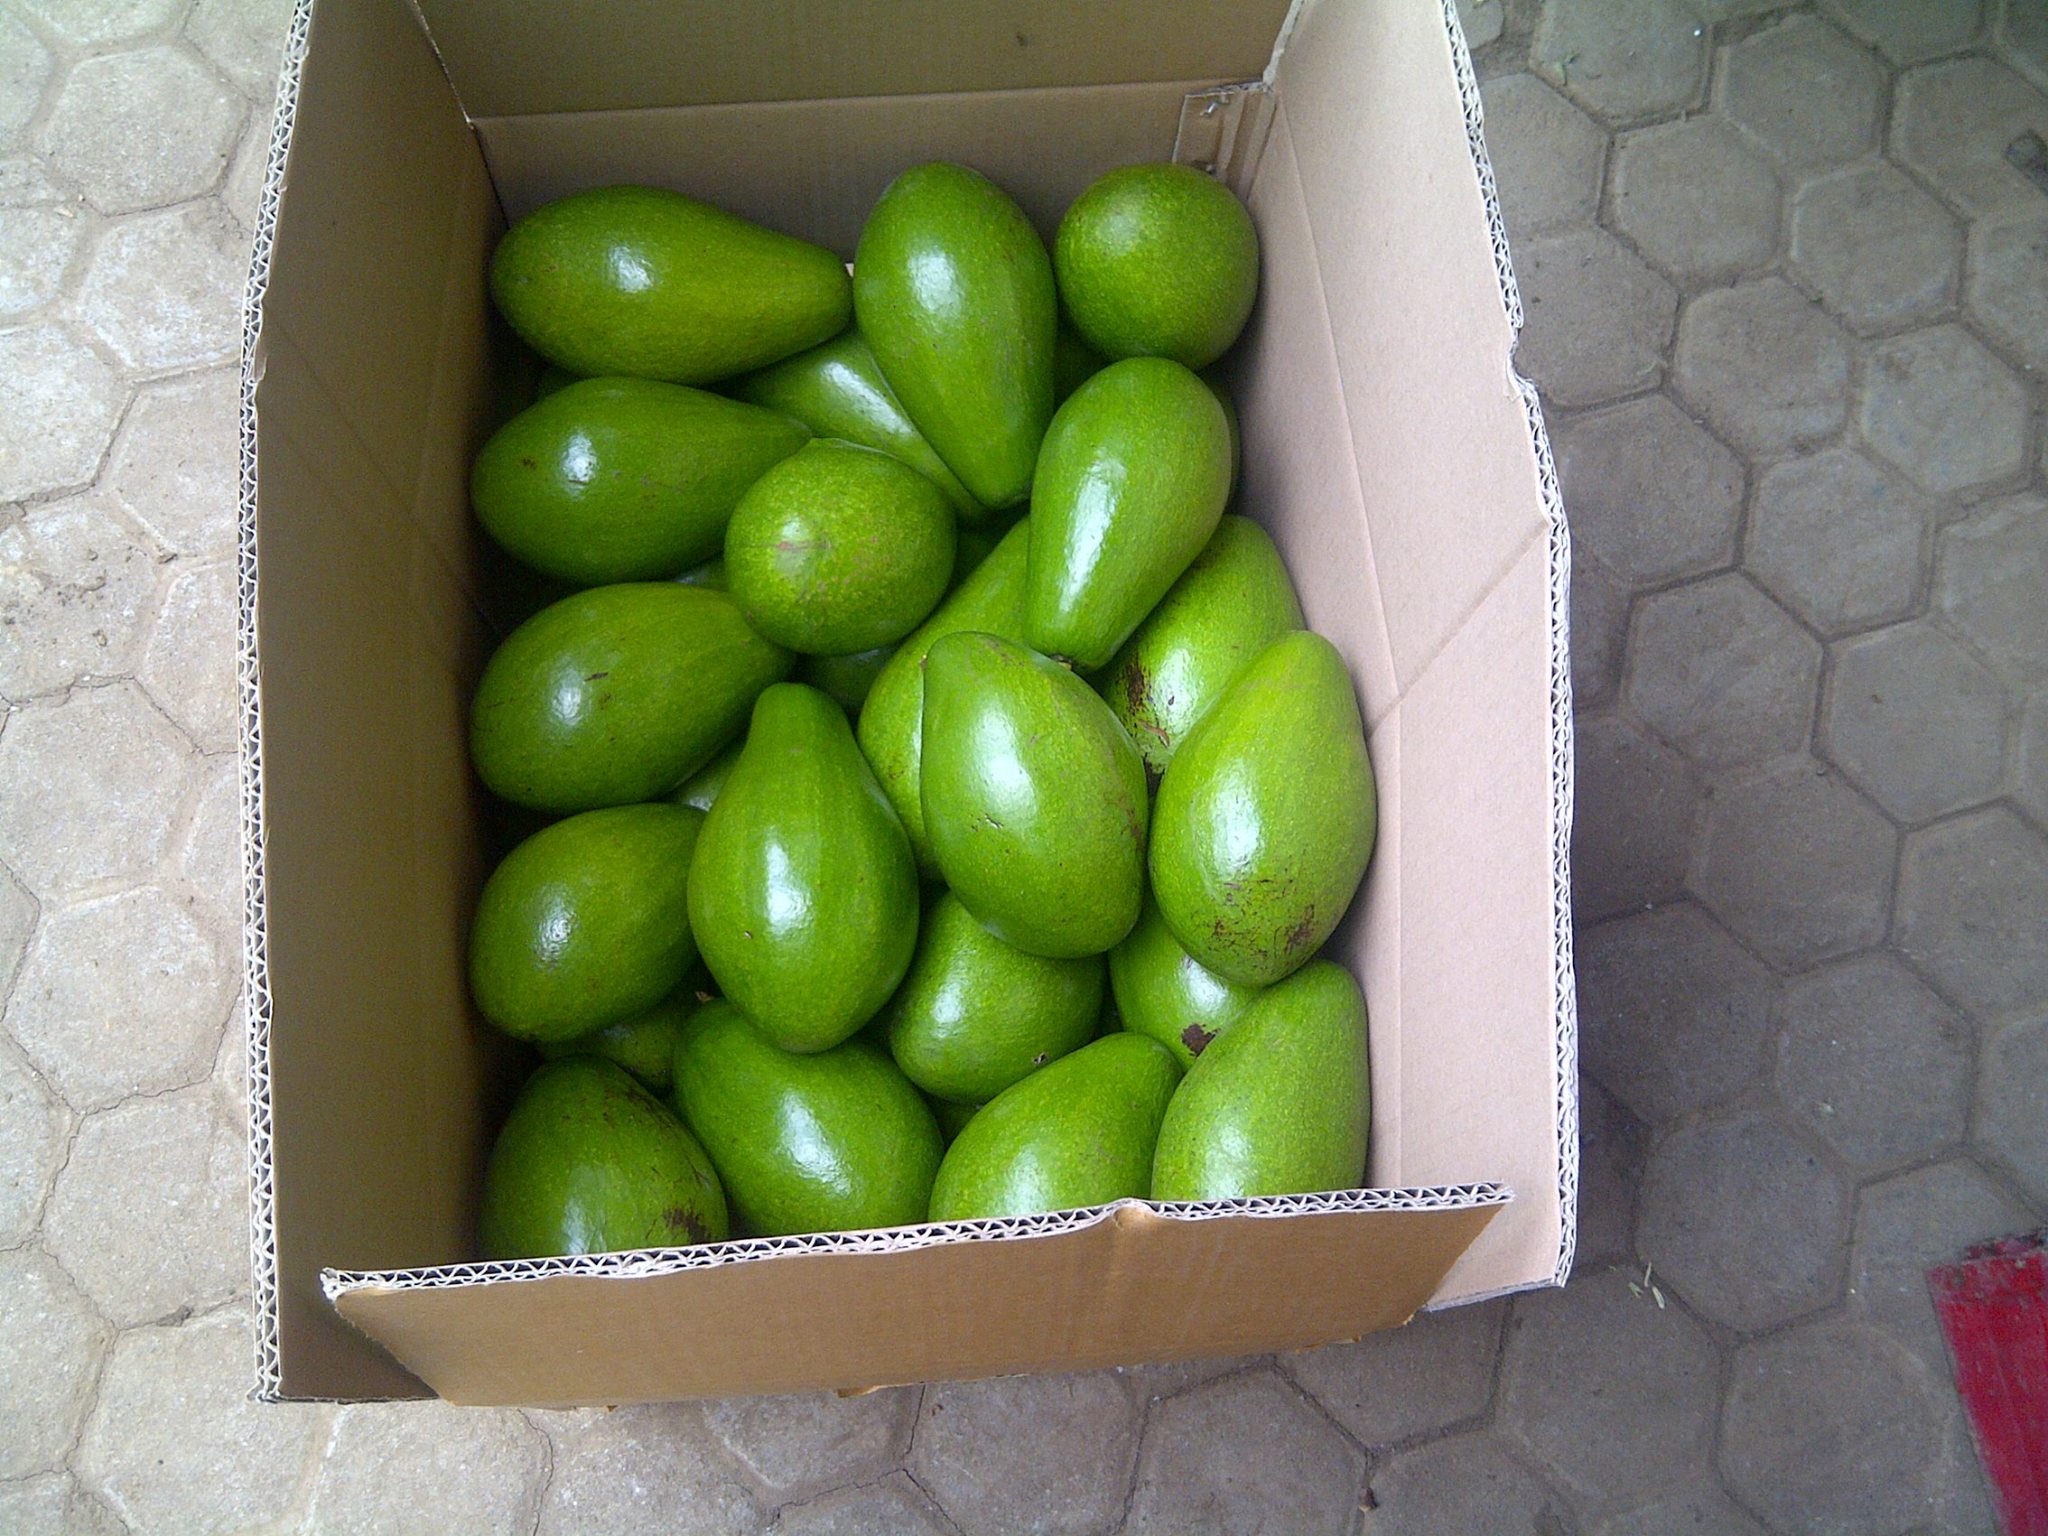 dragon fruit packaging with box supplier in indonesia pt global fajar indonesia